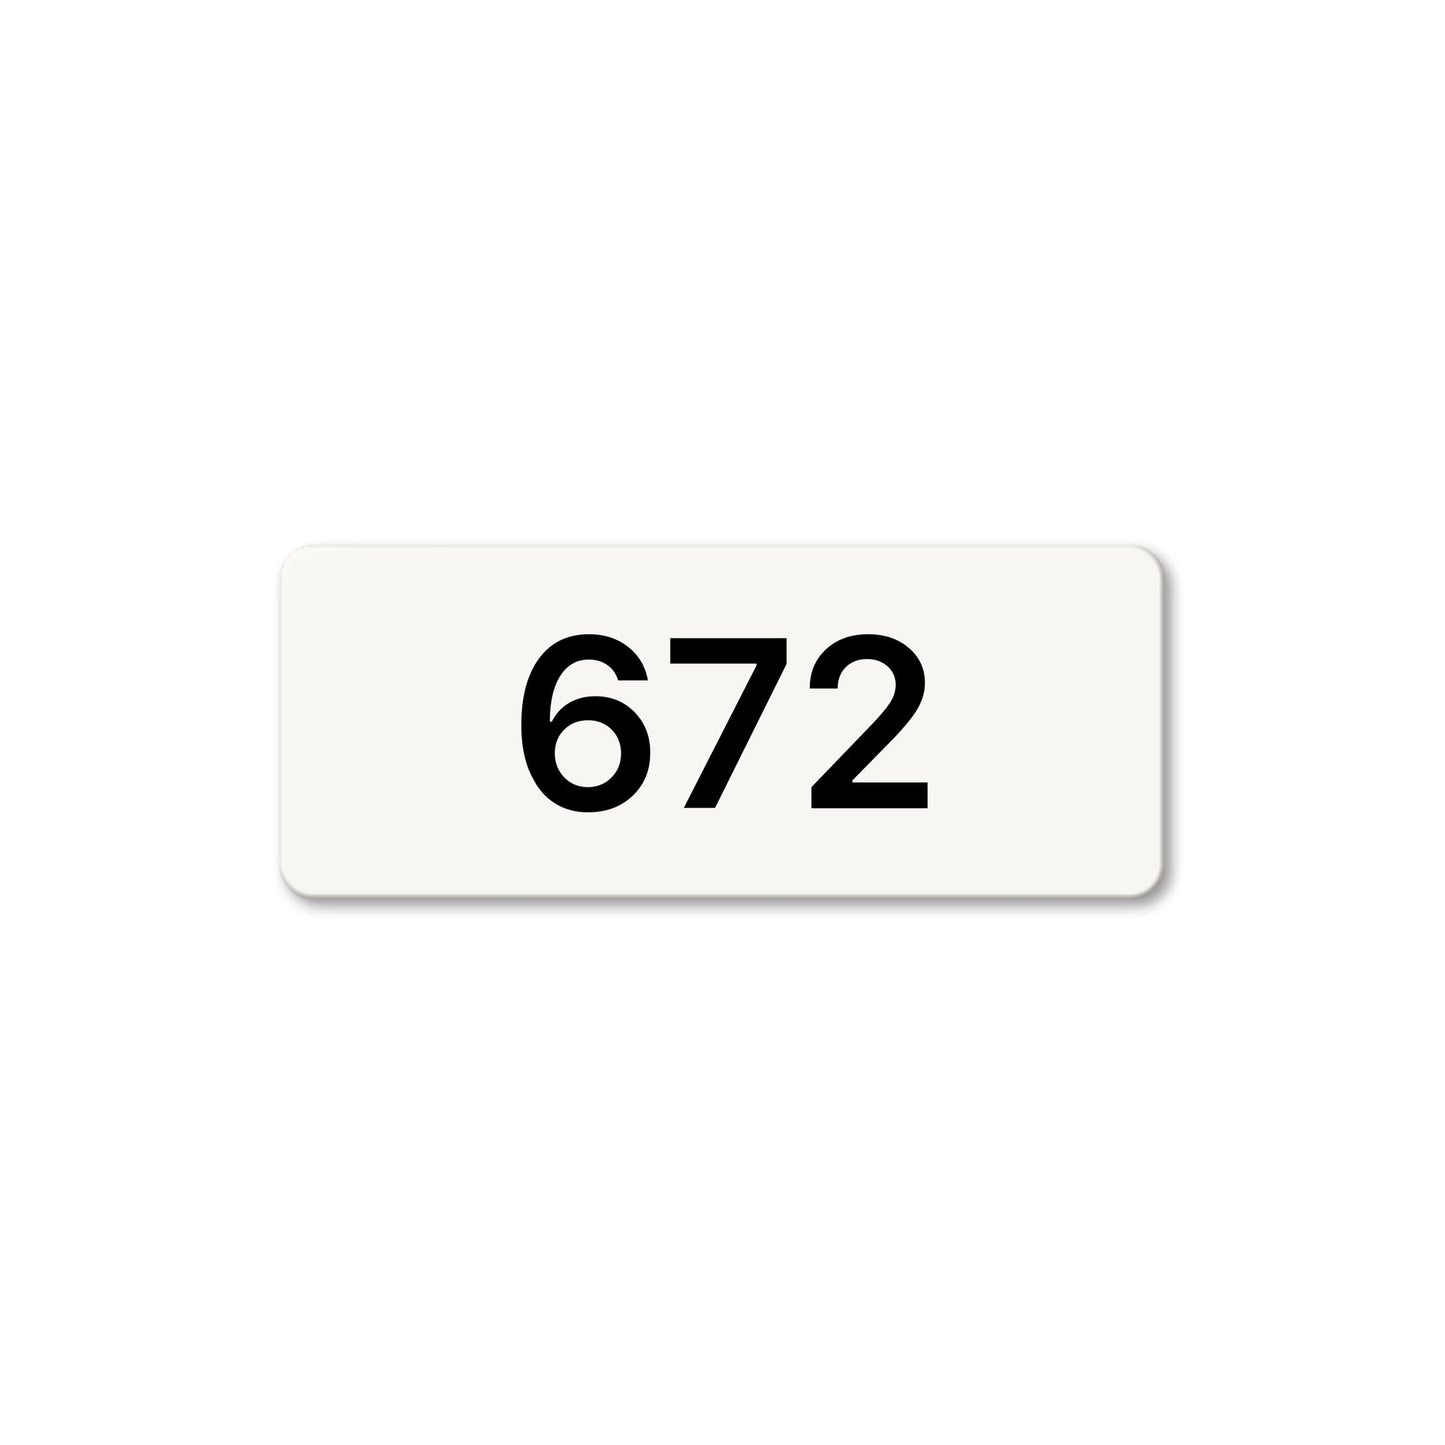 Numeral 672